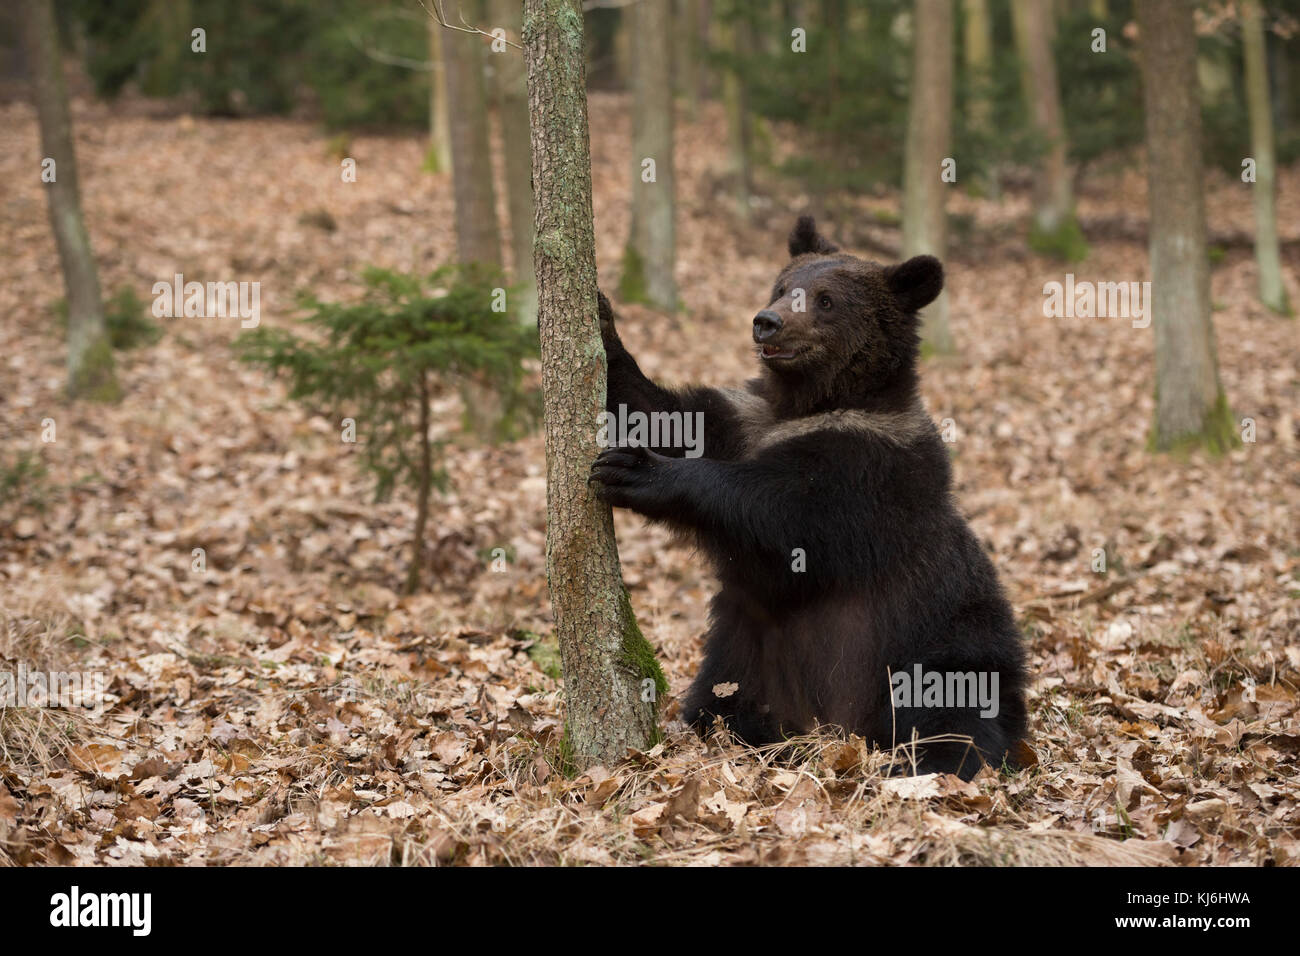 European Brown Bear / Braunbaer ( Ursus arctos ), playful adolescent, sitting on its back in dry leaves, holding a tree, looks cute and funny, Europe. Stock Photo